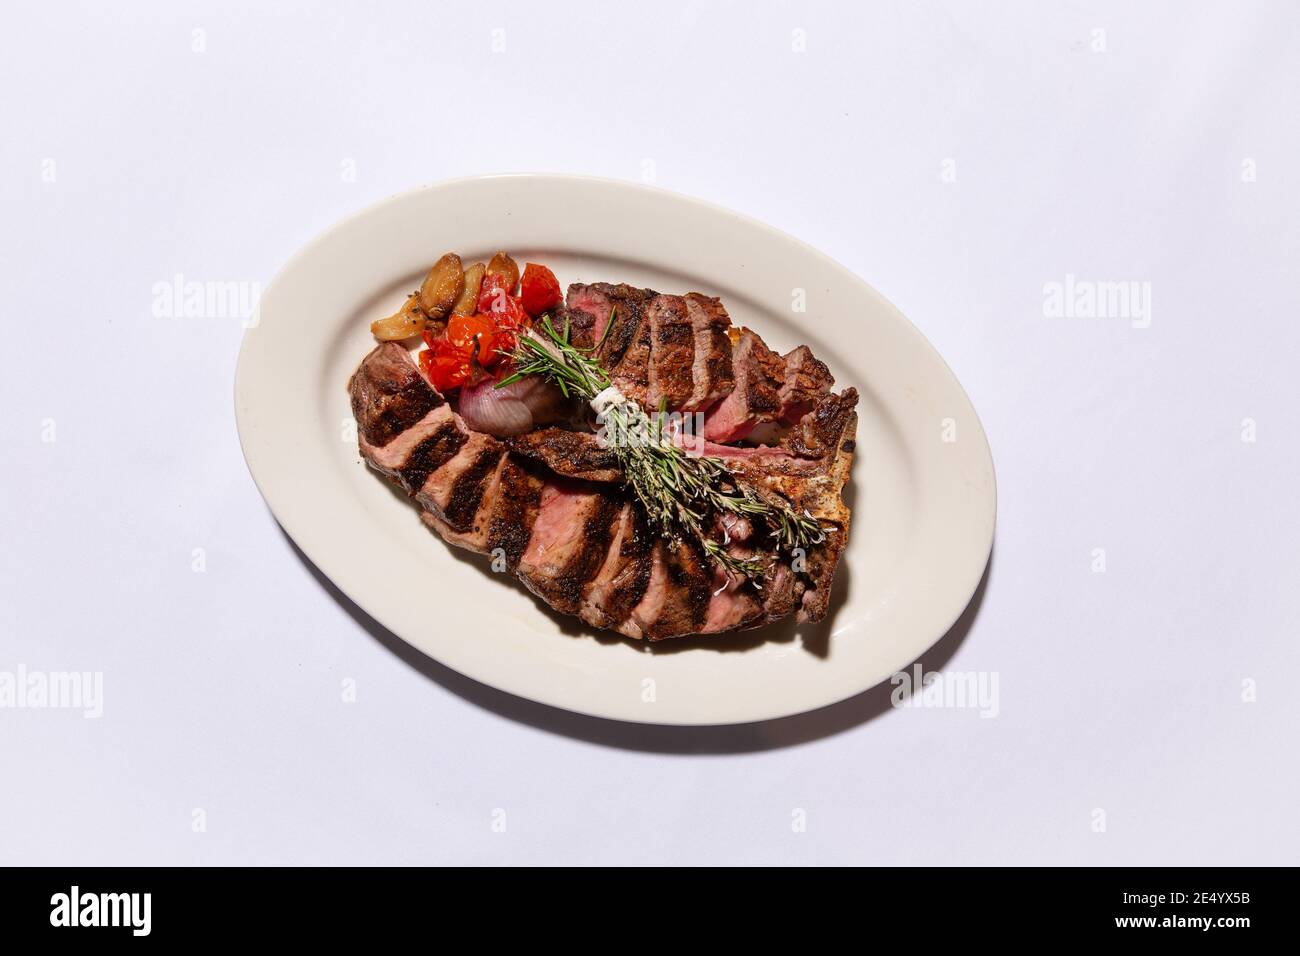 High Angle View of Sliced Bone-in Steak with Rosemary Stock Photo